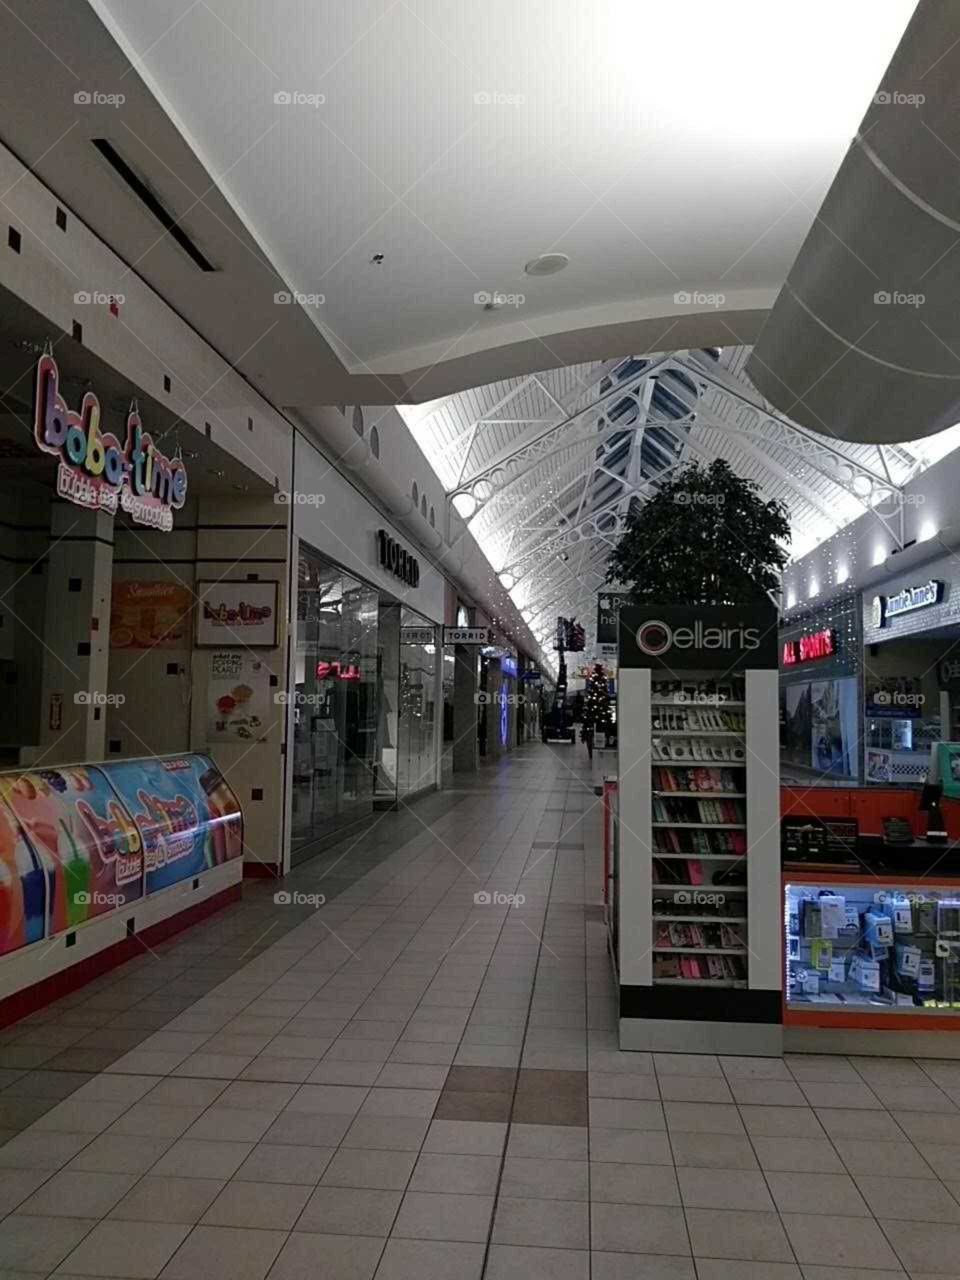 mall decorations coming down